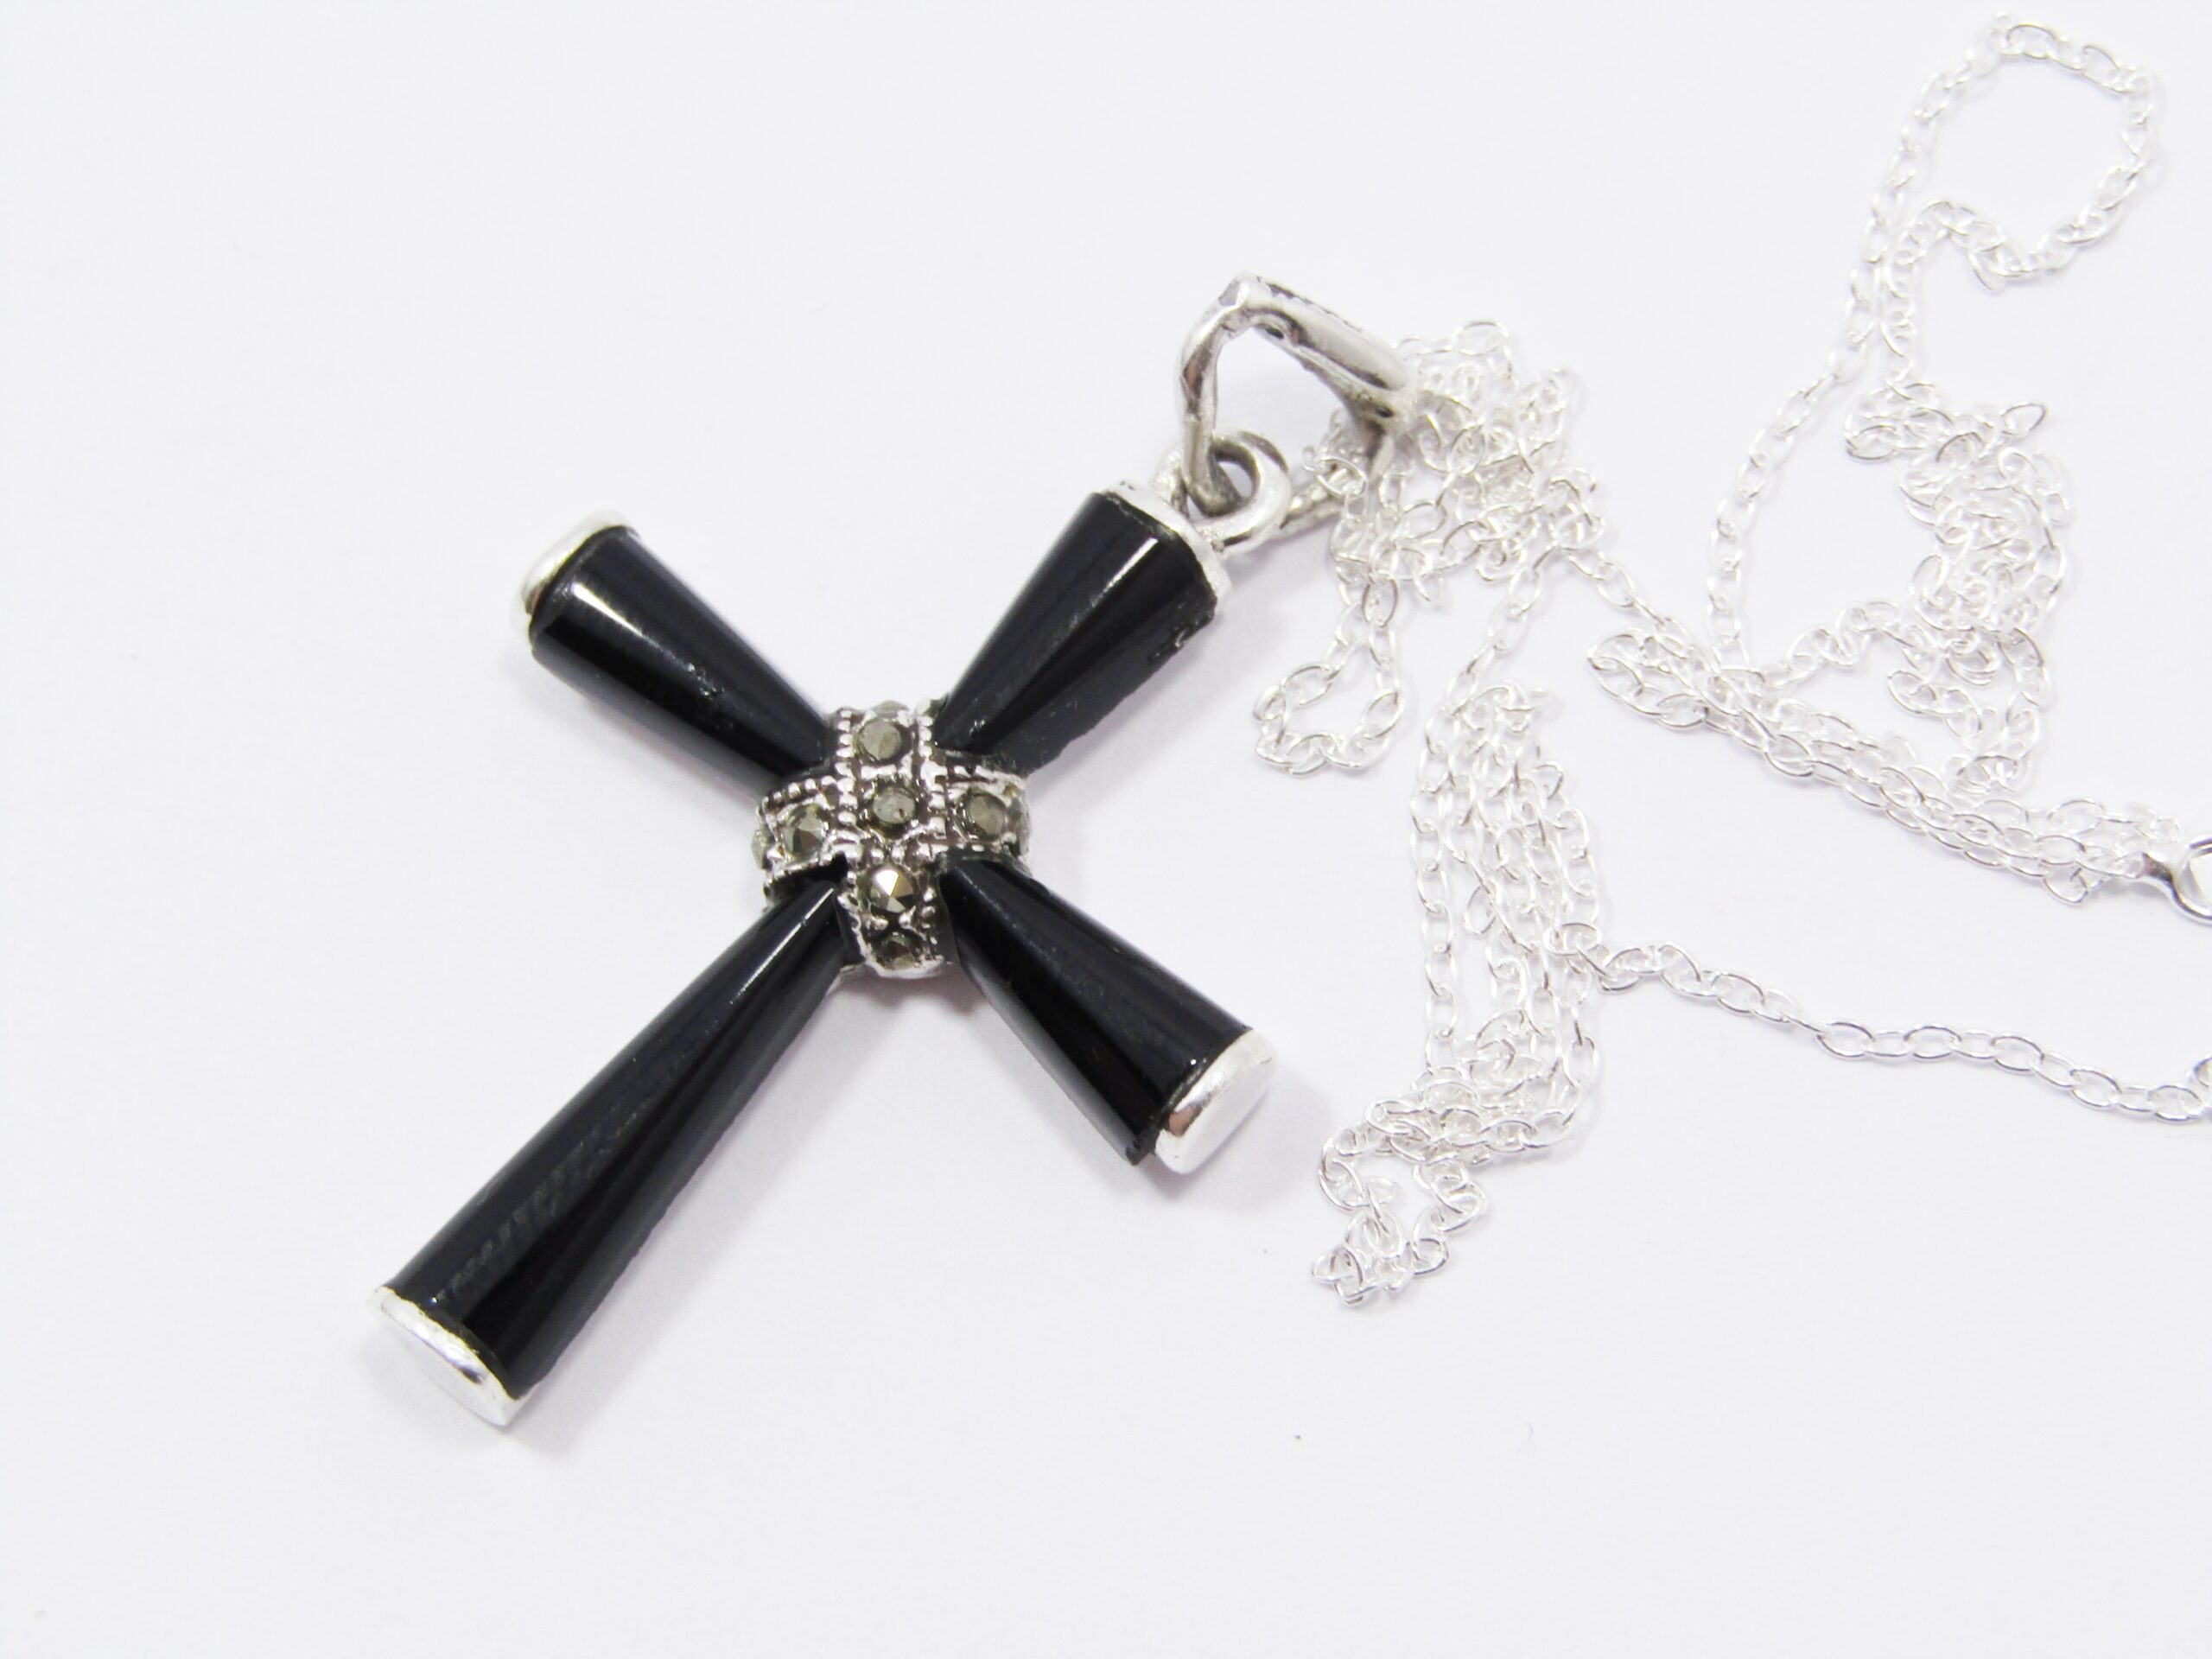 A Stunning Onyx Cross With Marcasite’s On Chain in Sterling Silver